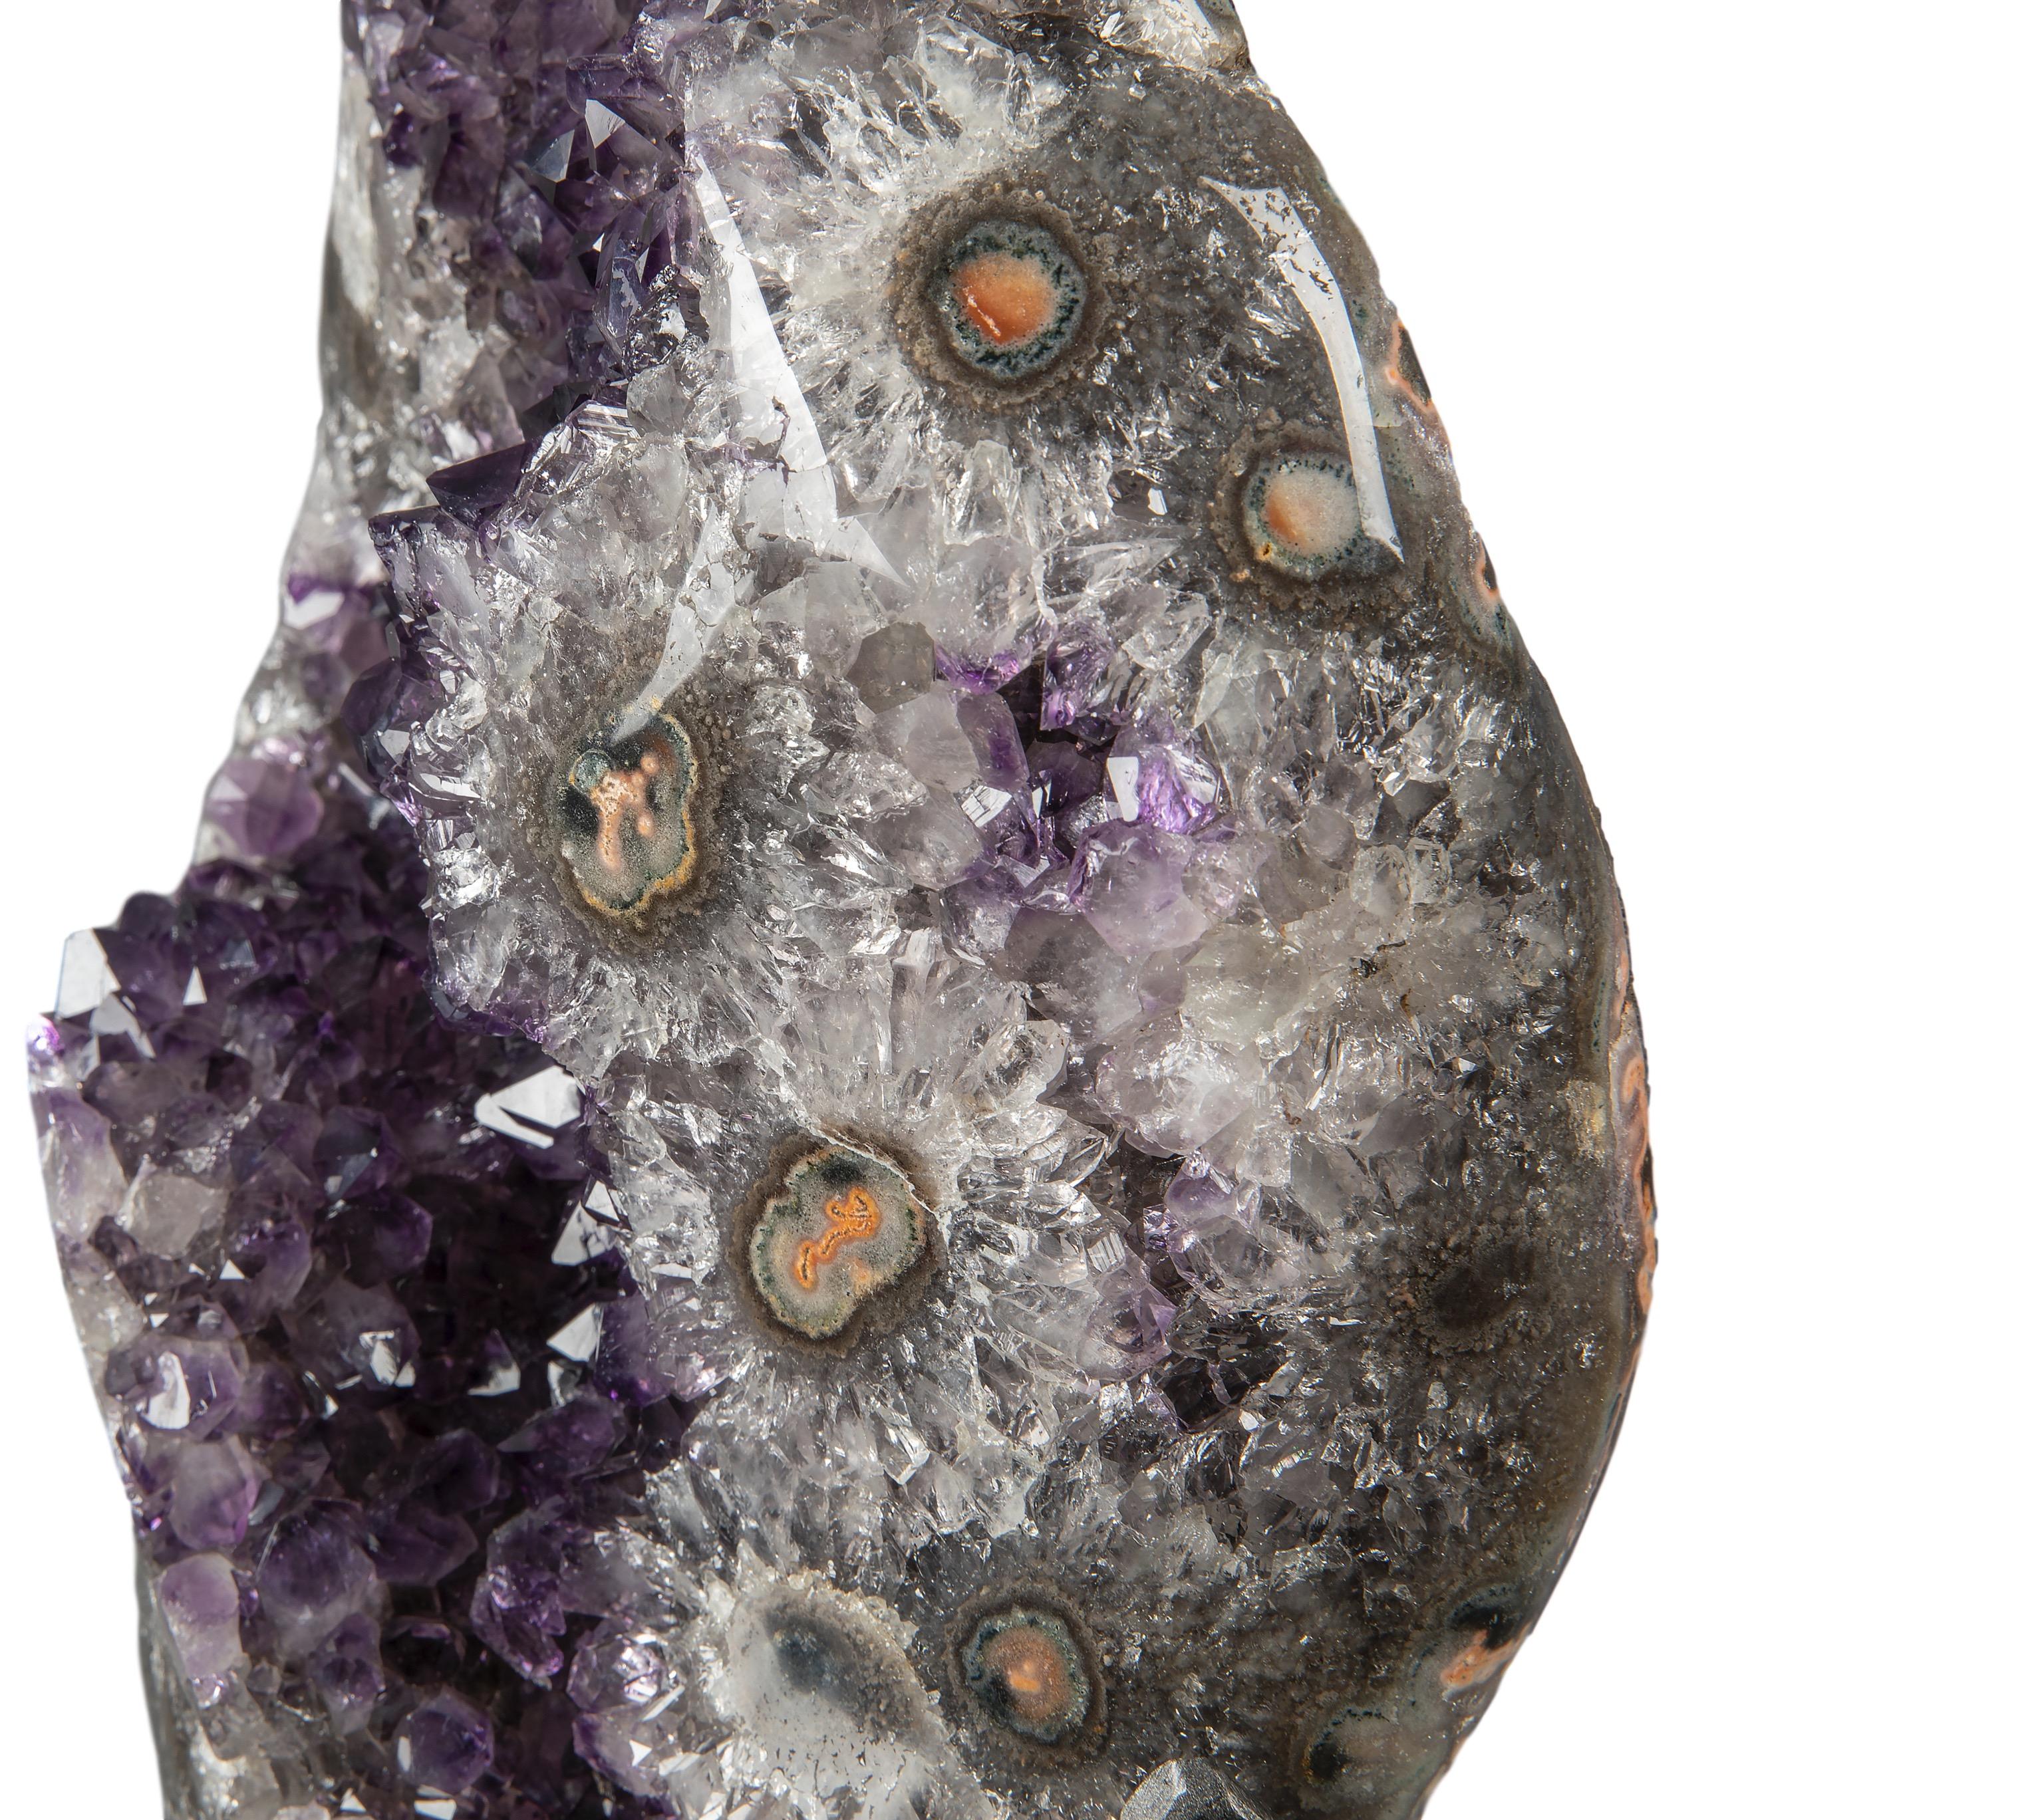 Minerals fuse together in this uniquely beautiful piece, presenting the viewer with deep purple amethyst and a mix of white quartz, green celadonite, grey, brown and some artful inflections of pink and orange agate.  Rare in the unique spectrum of